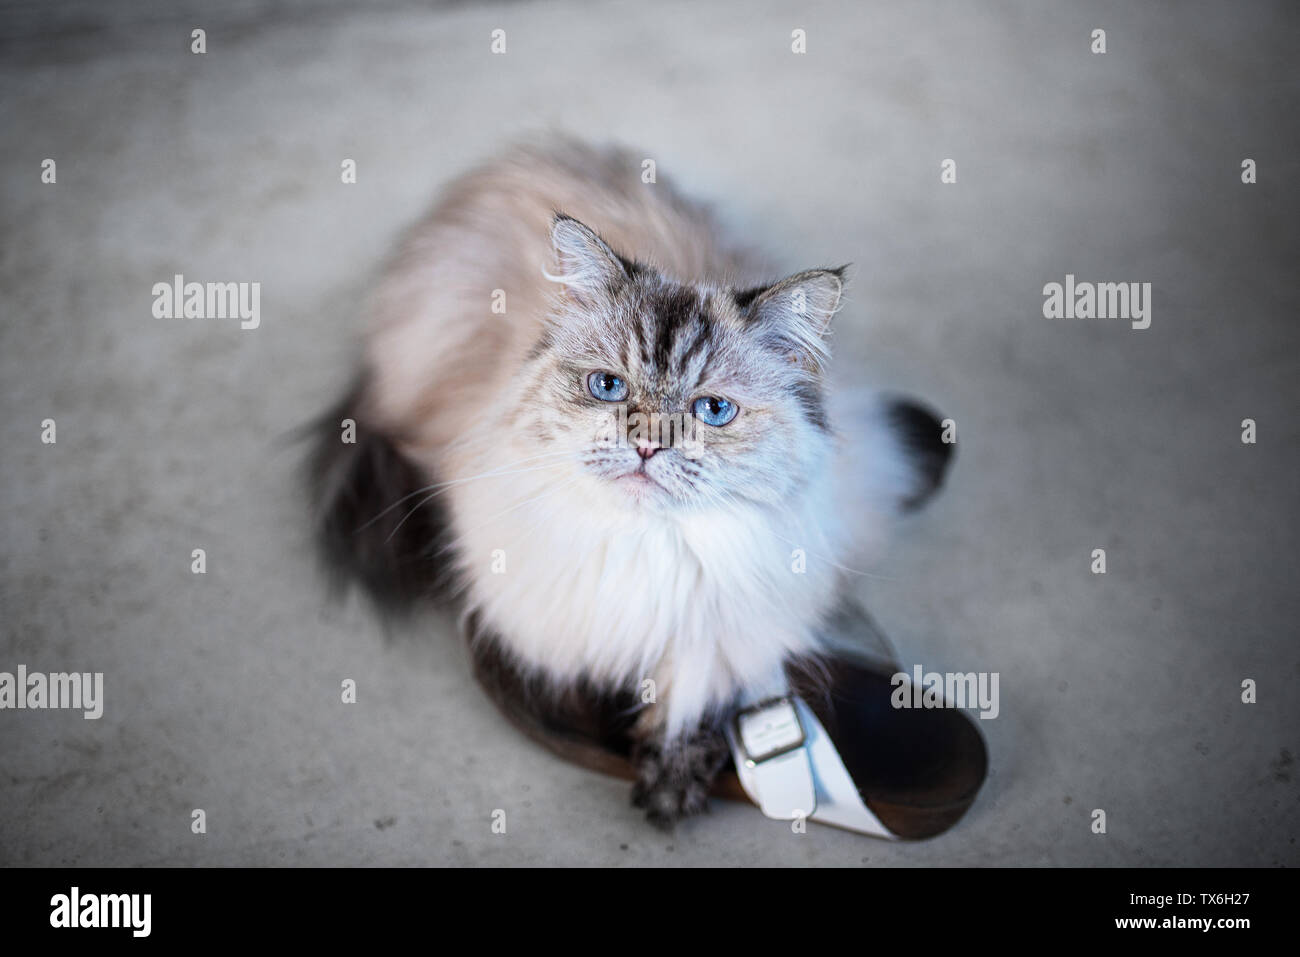 fluffy long-haired cat relaxing on pair of shoes Stock Photo